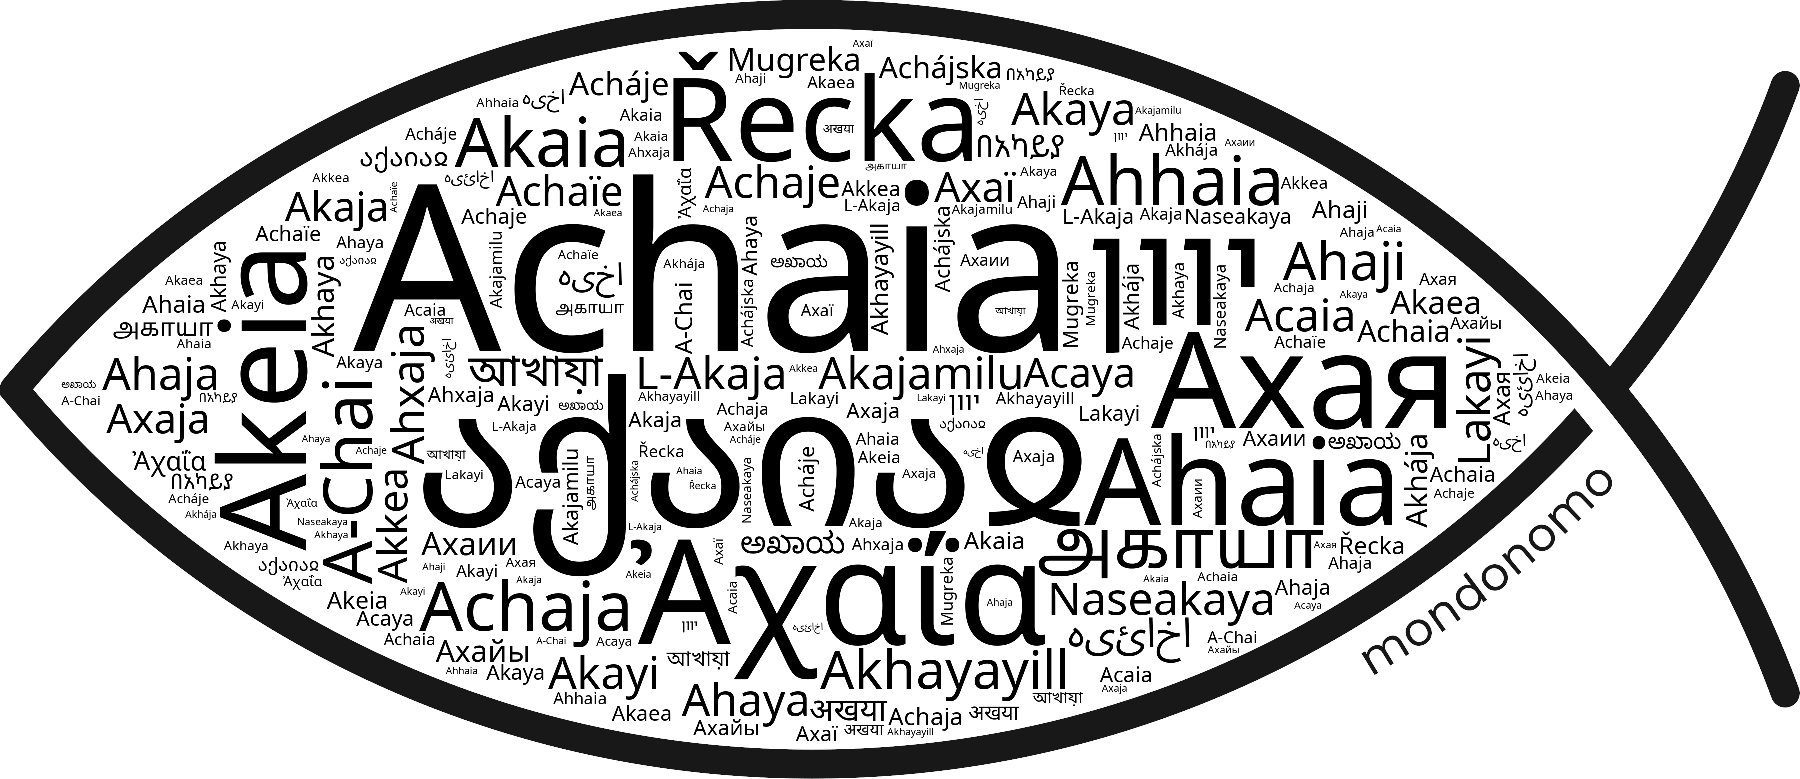 Name Achaia in the world's Bibles